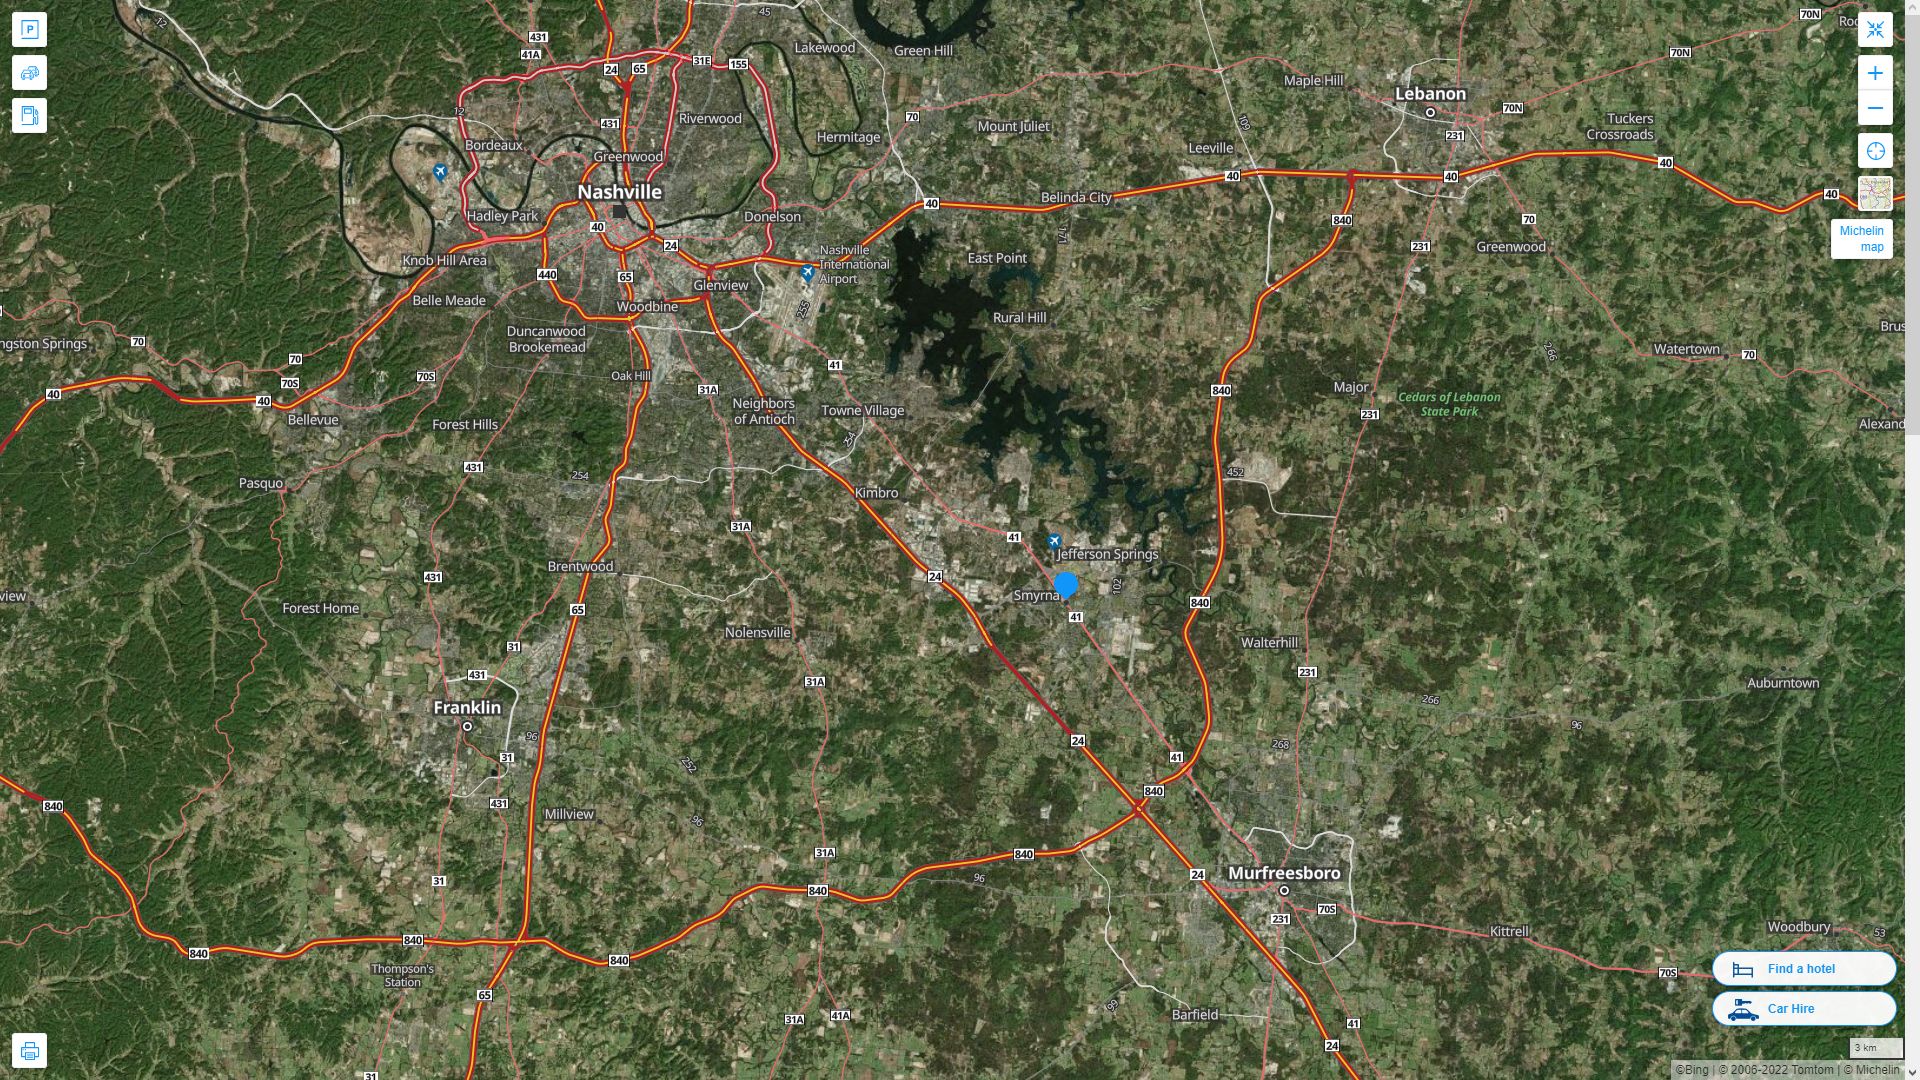 Smyrna Tennessee Highway and Road Map with Satellite View